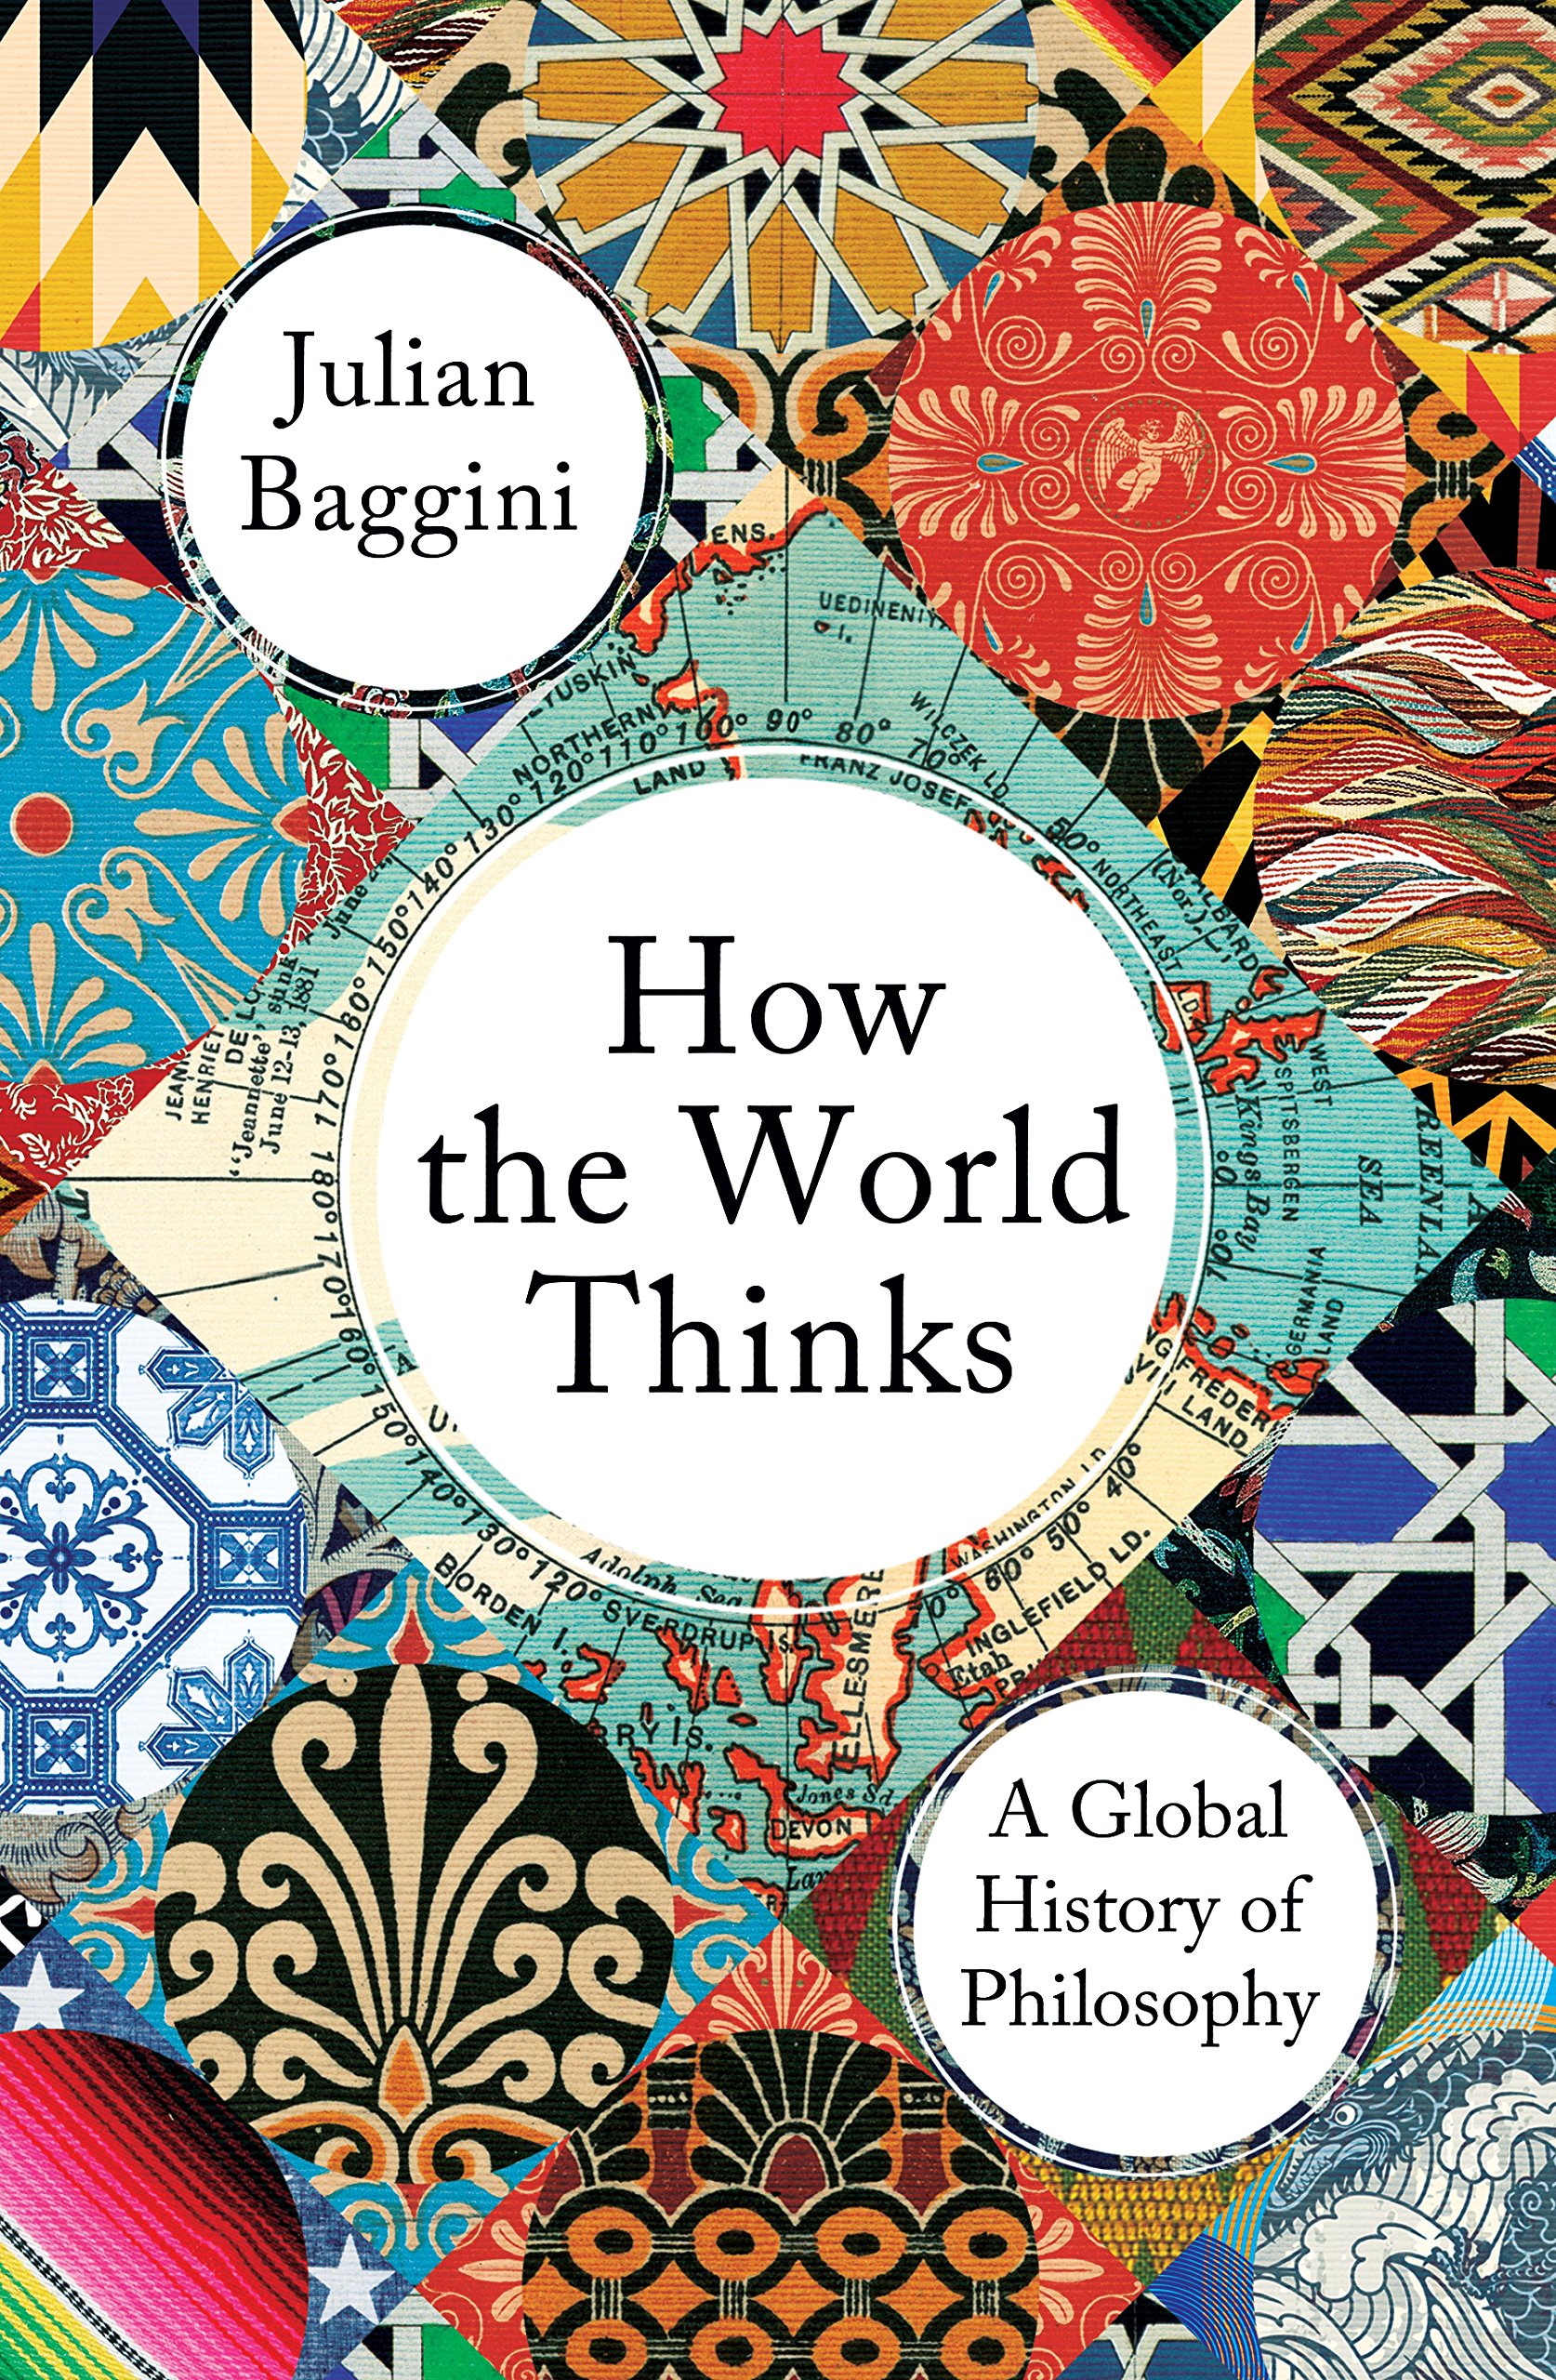 How the World Thinks: A Global History of Philosophy | Julian Baggini